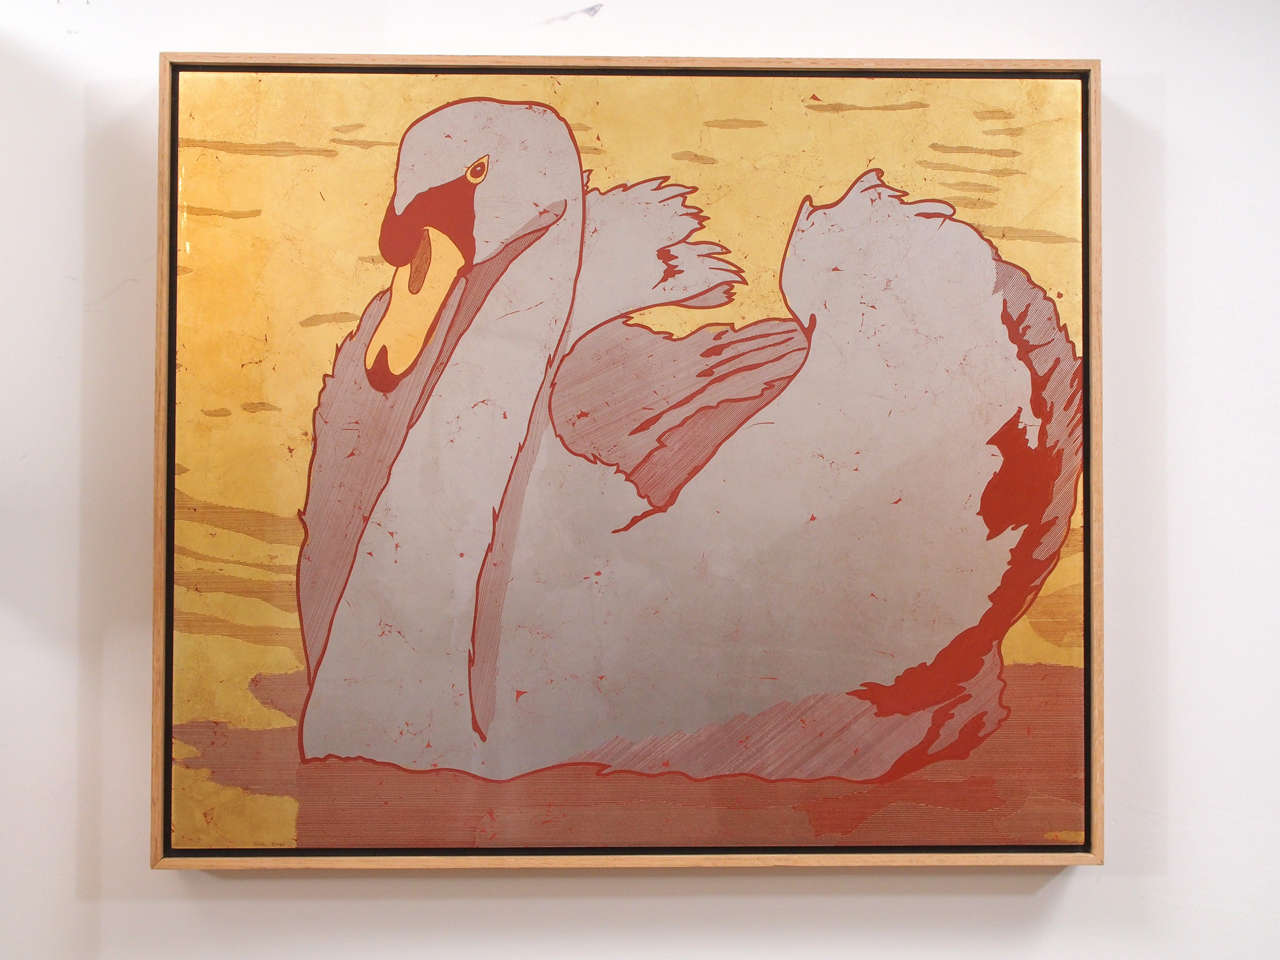 An elegant work in gold and silver leaf over clay, attractively framed, by noted New Orleans artist Blake Boyd